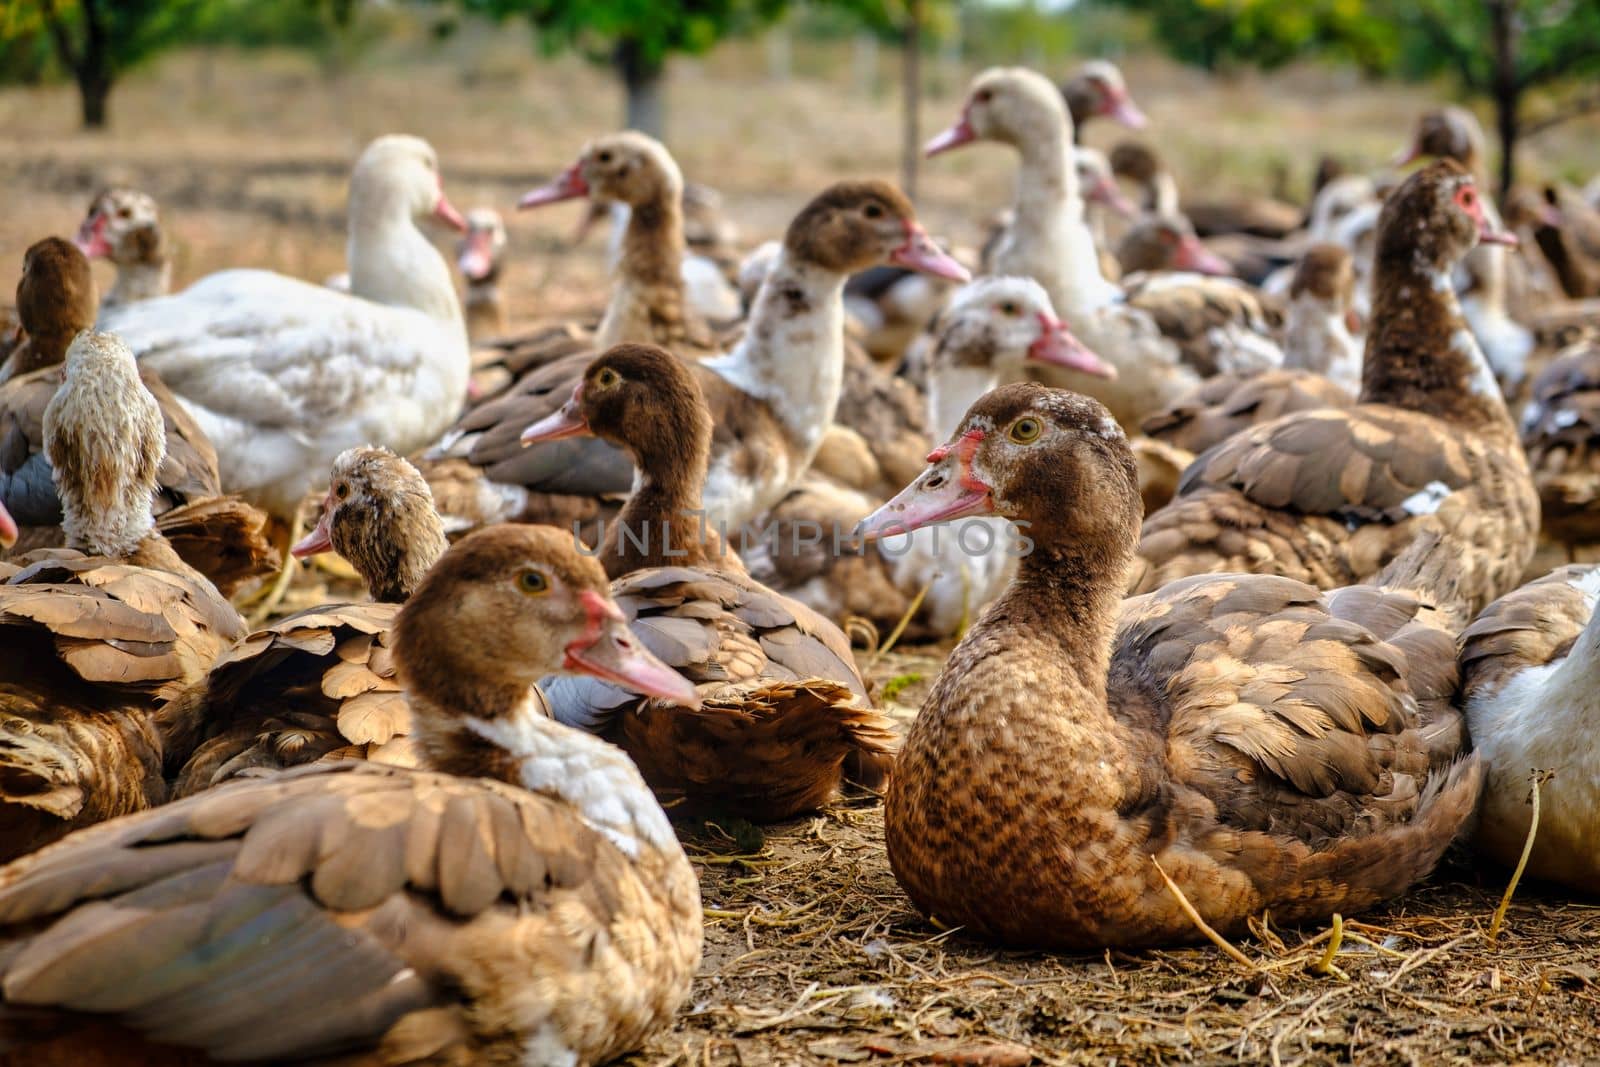 Group of ducks in the farm. Close up ducks, see the details and expressions of ducks by igor010